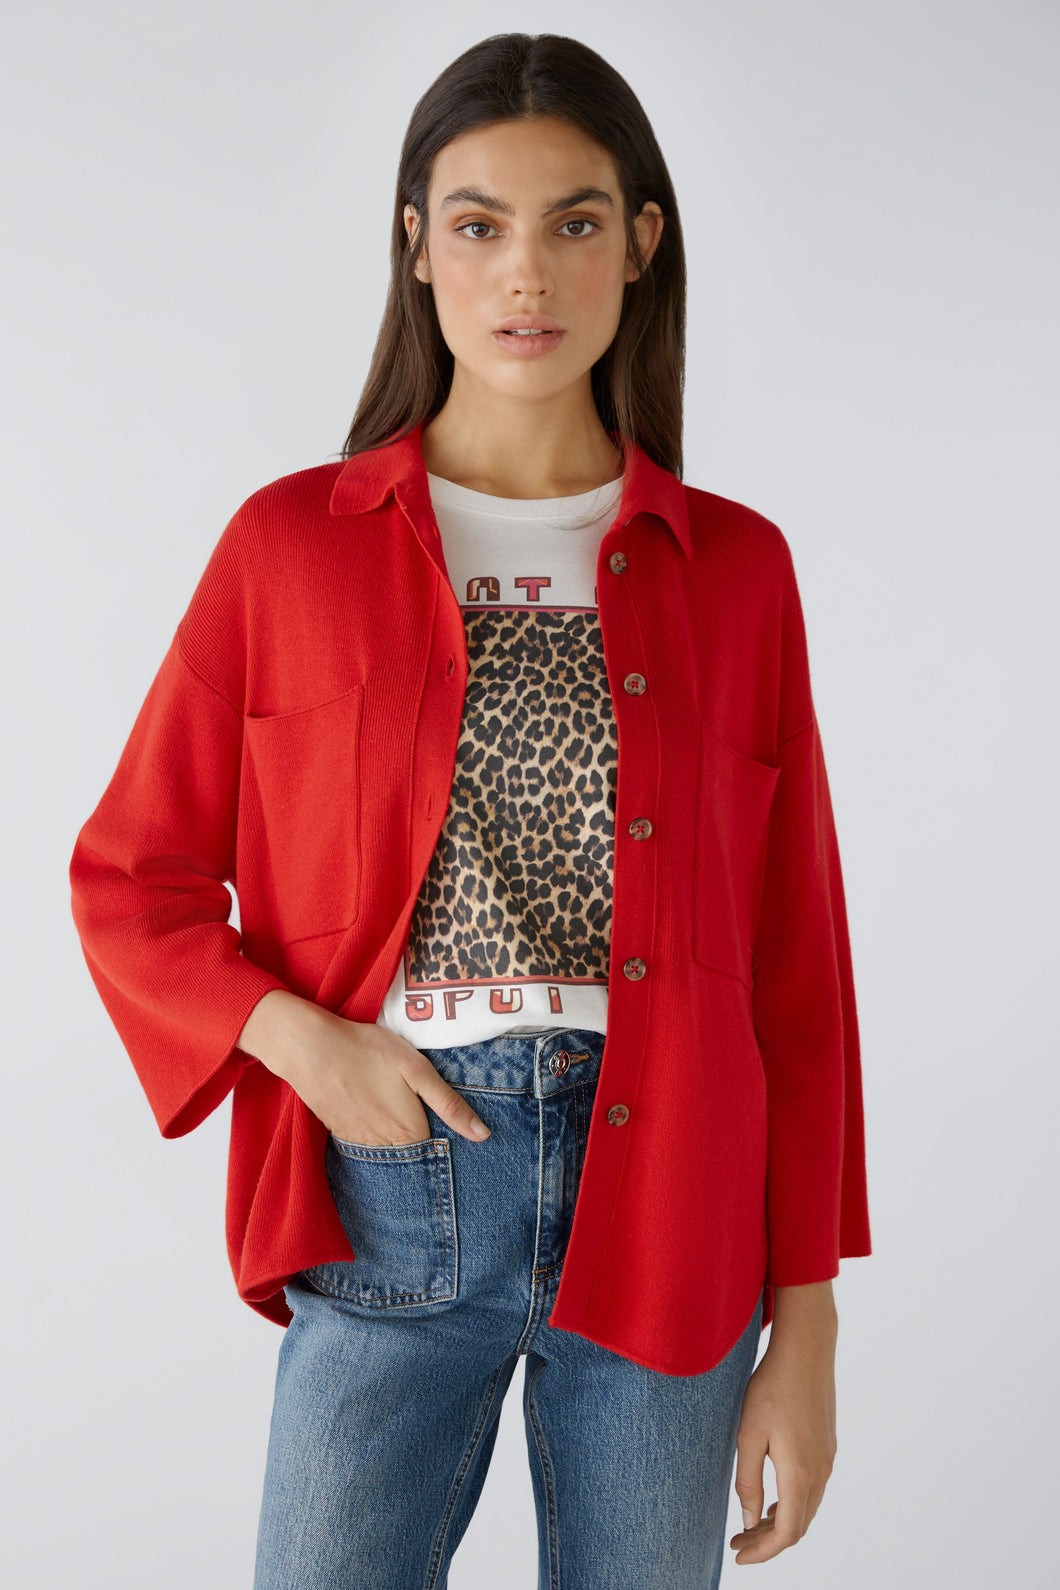 Oui - Red Cardigan in Viscose, Cotton and Silk